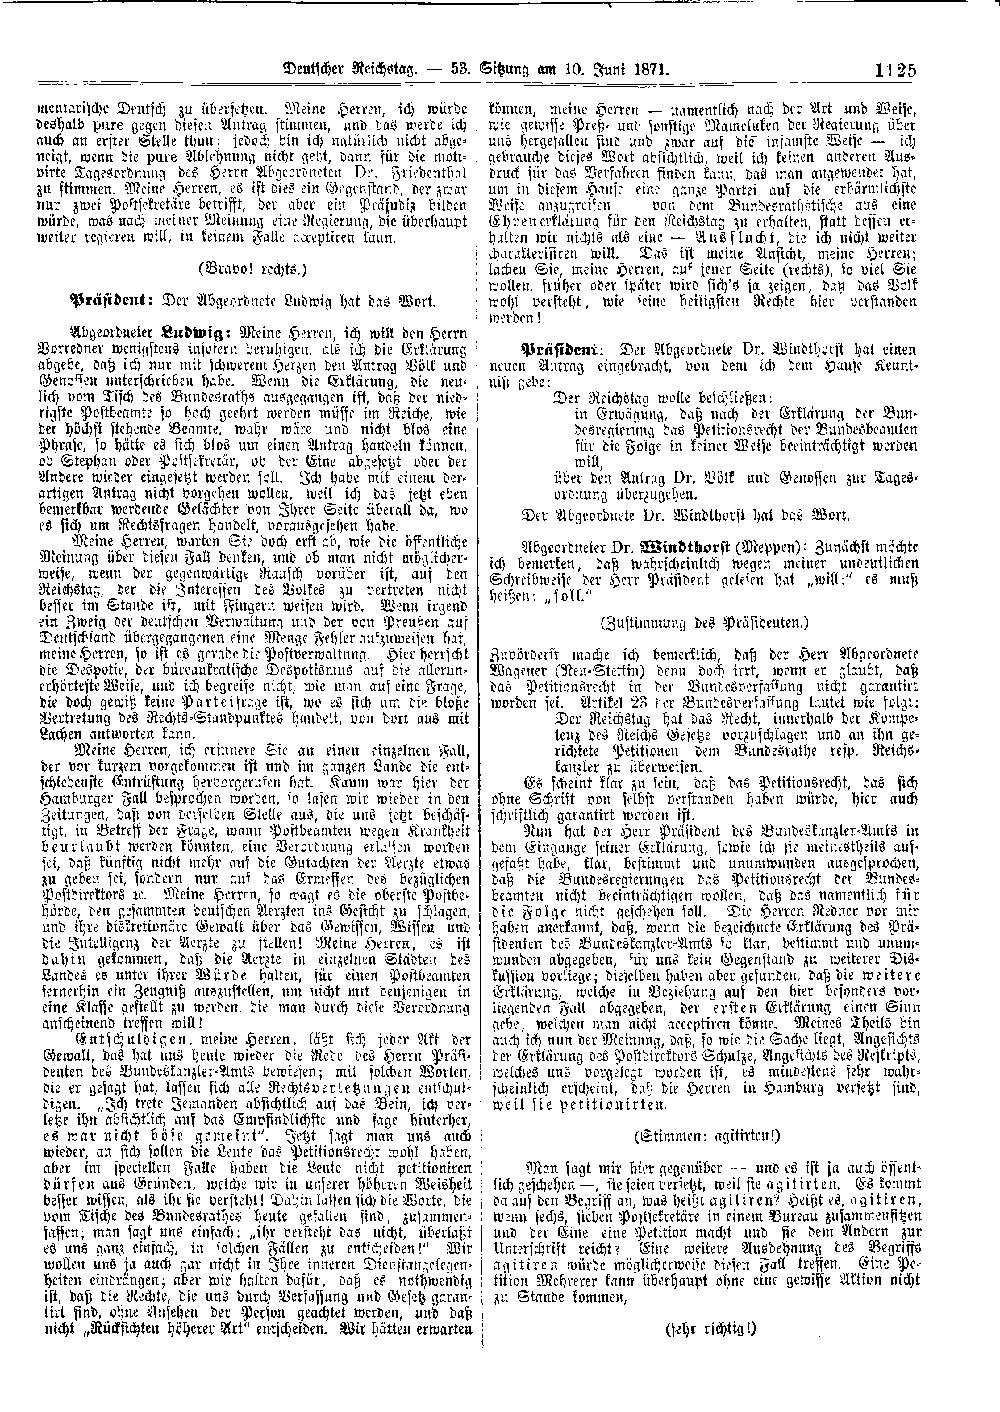 Scan of page 1125